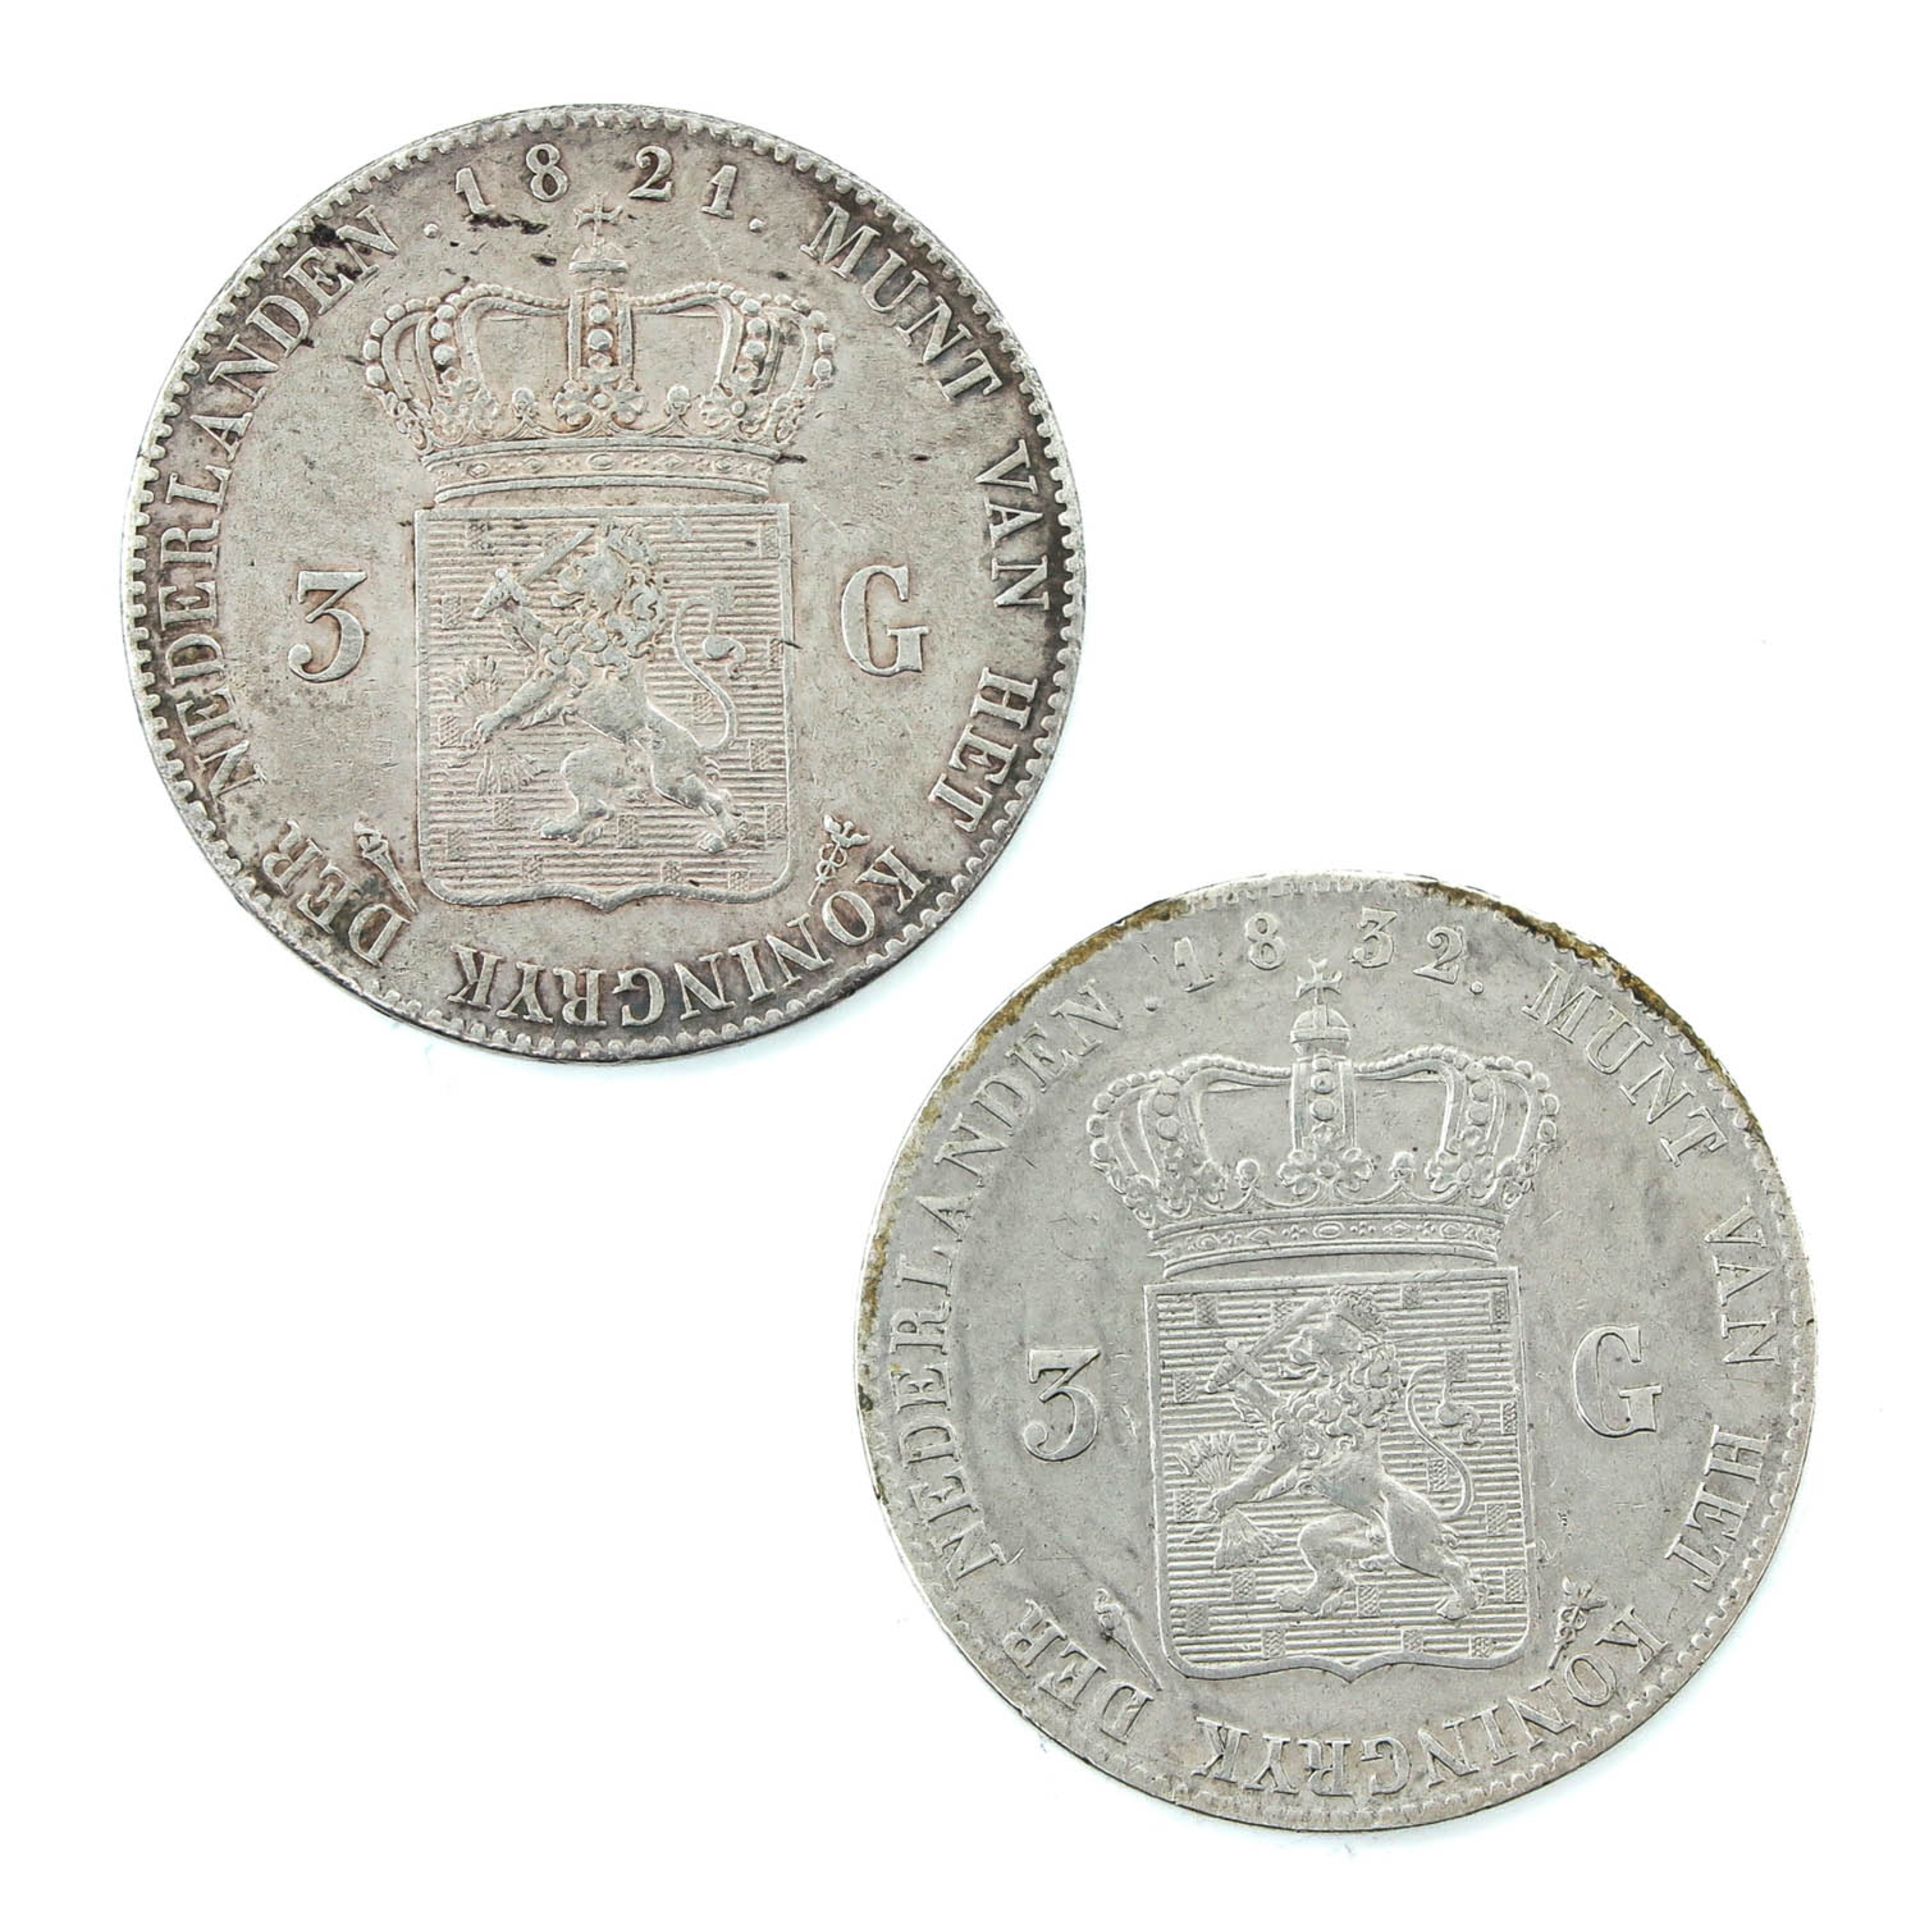 A Lot of 2 Silver 3 Guilder Coins